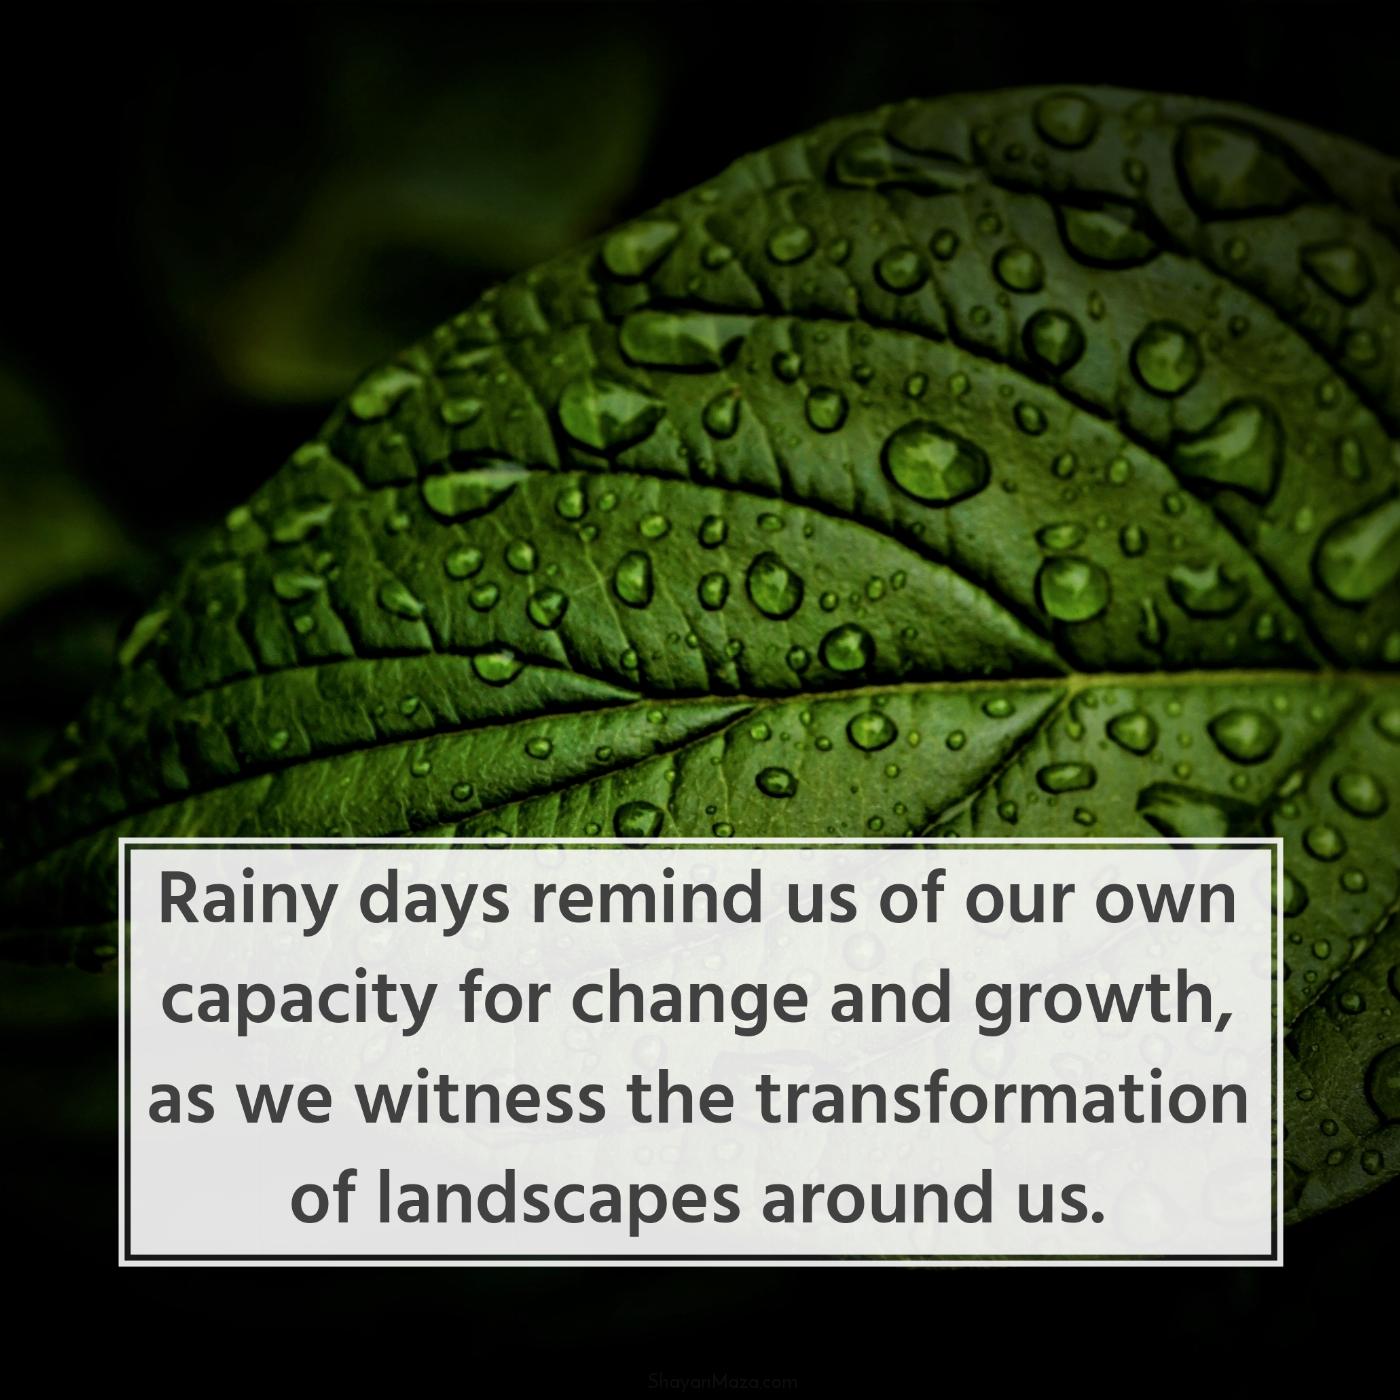 Rainy days remind us of our own capacity for change and growth